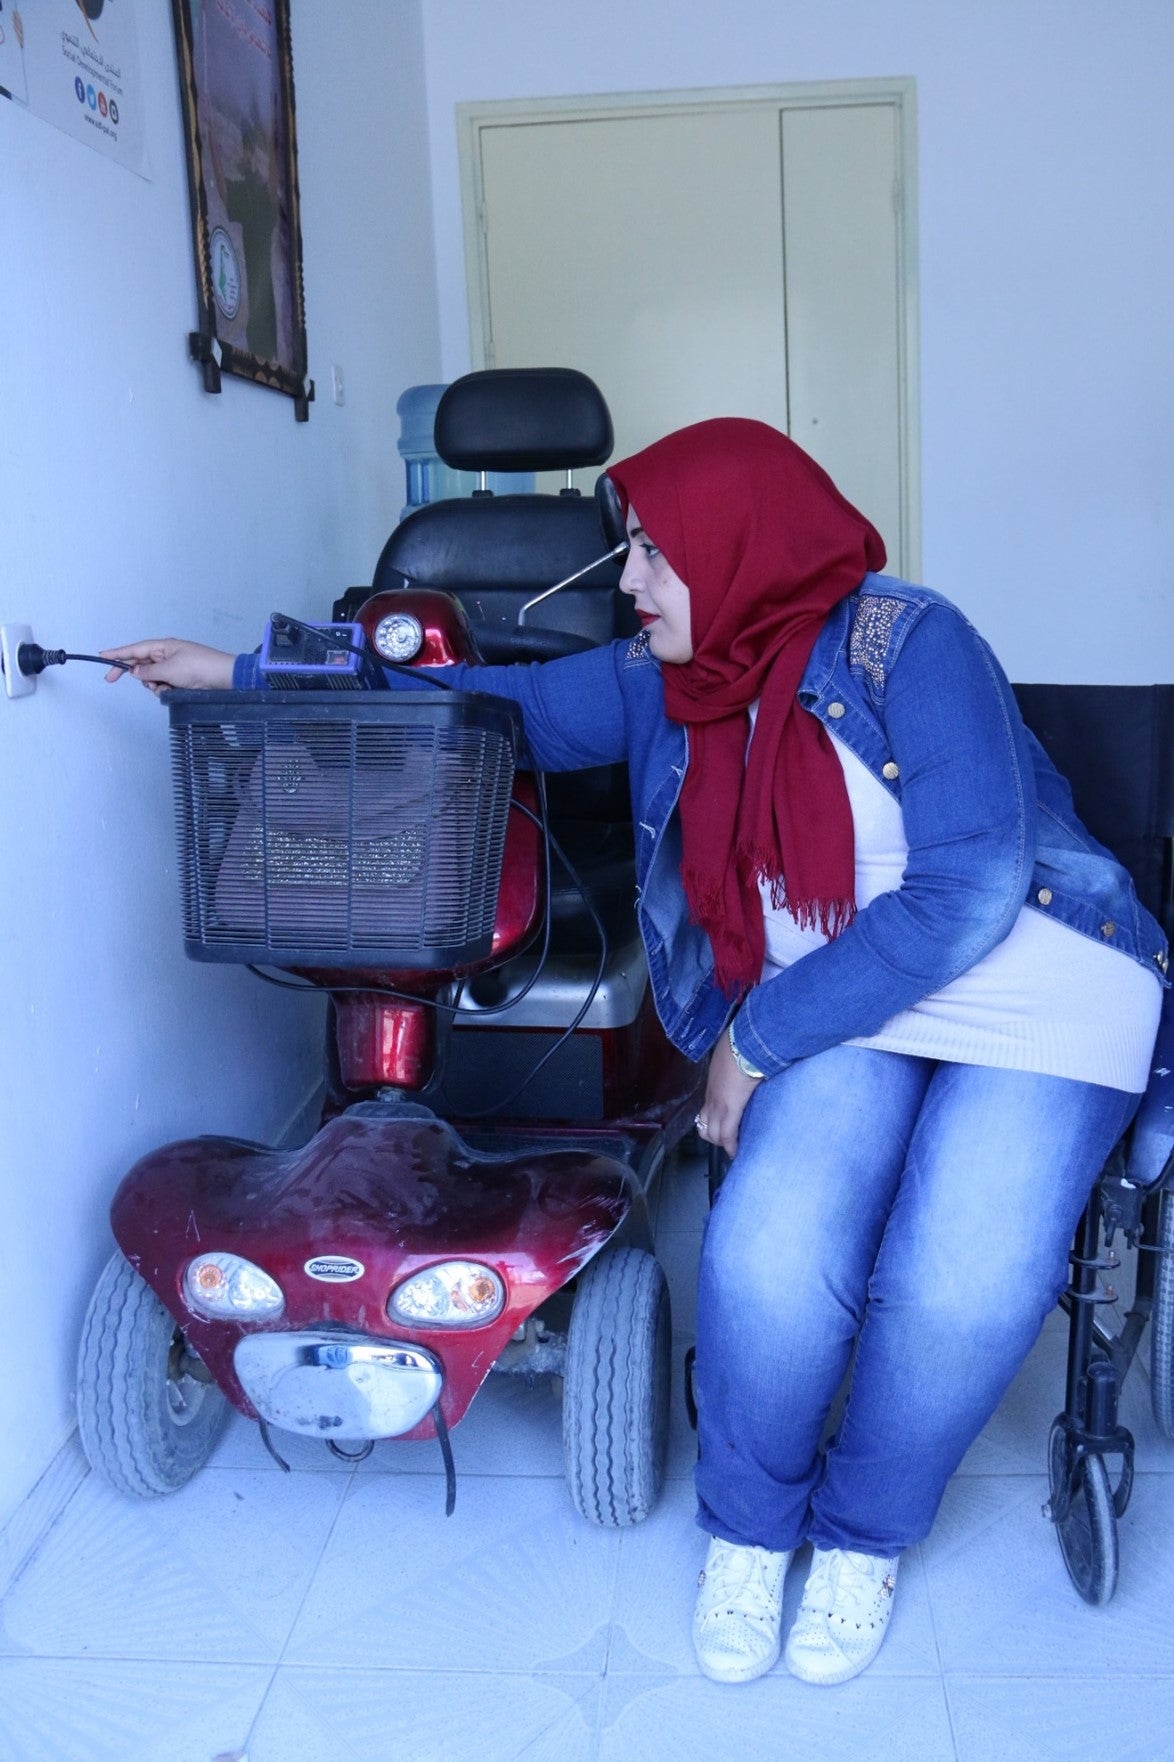 Doaa Qashlan, a 30-year-old woman with physical disability, charges her mobility scooter in Gaza. “Electricity outages are my biggest fear,” she told Human Rights Watch. “I need to charge my scooter. Otherwise, I will remain at home, where I feel life stopped.”